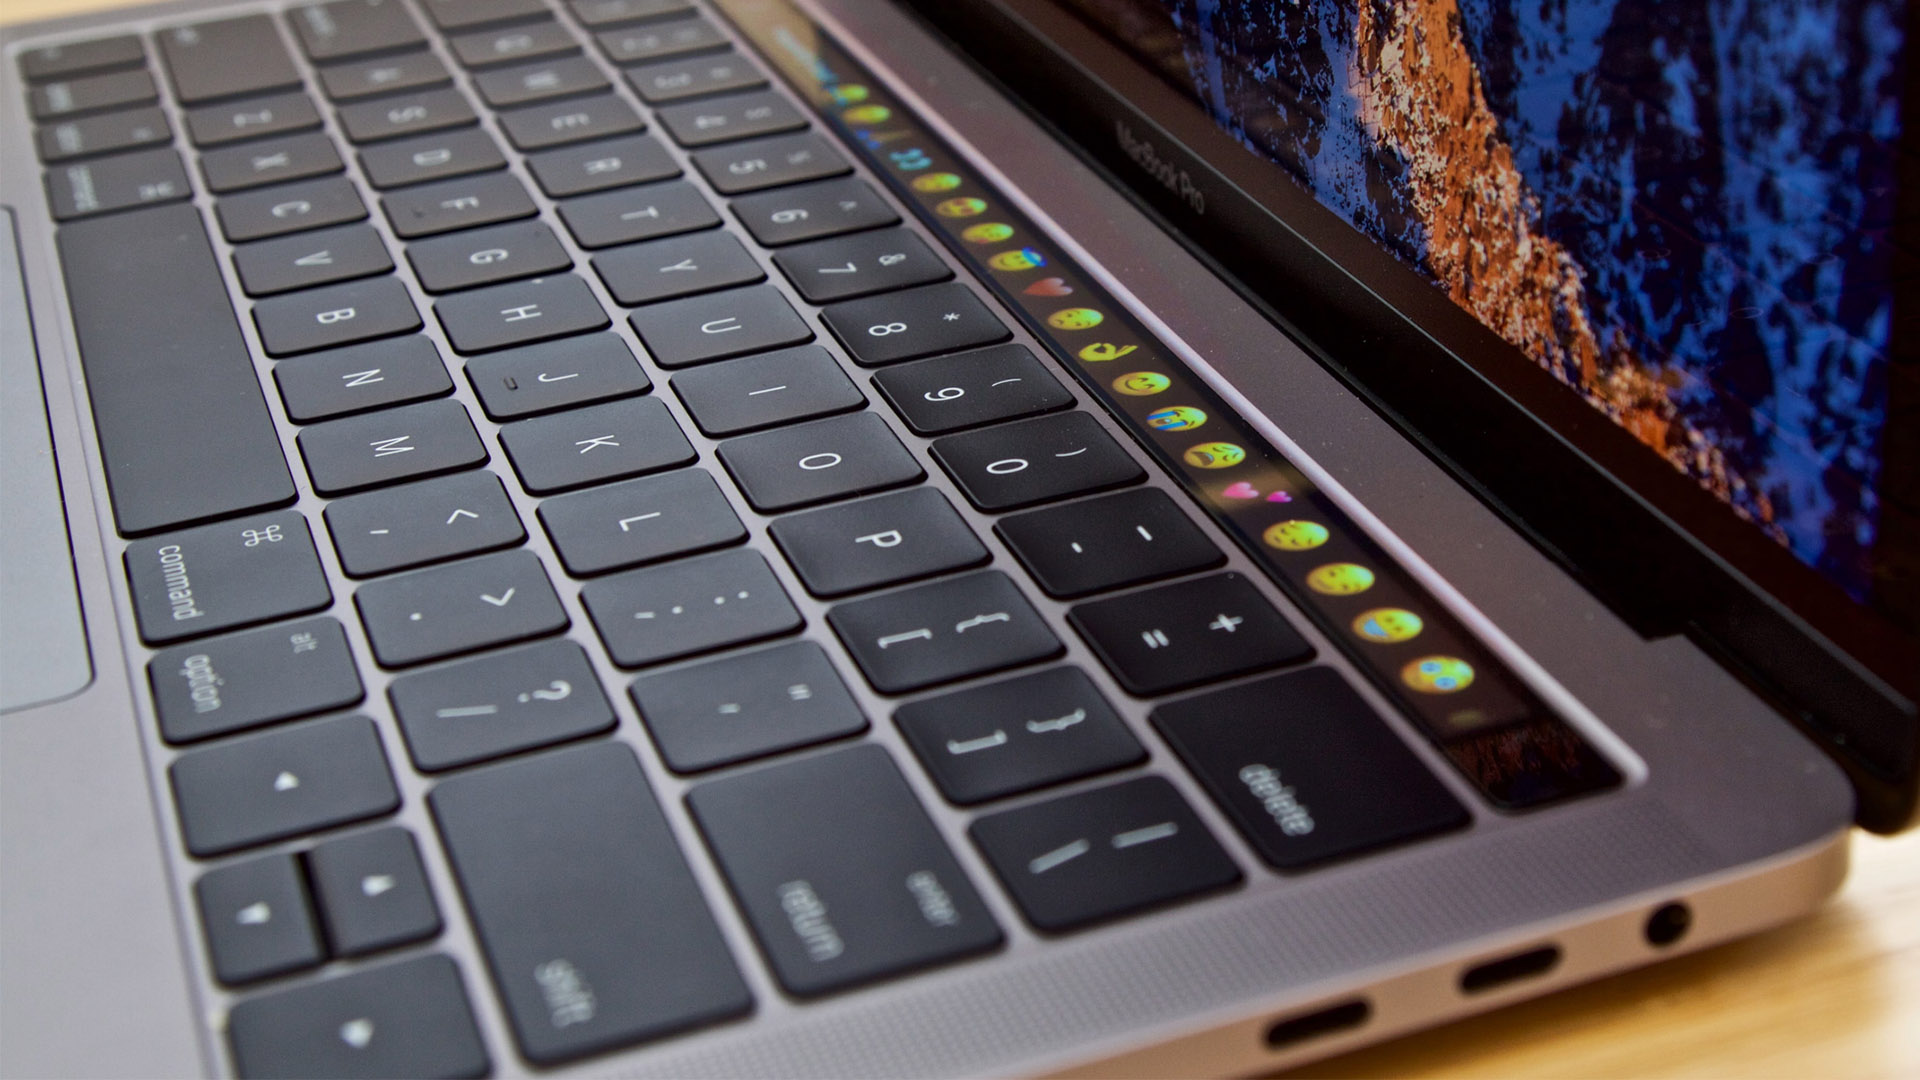 Current 13-inch MacBook Pro from right side seeing U S B C ports, keyboard and Touch Bar showing emoticons